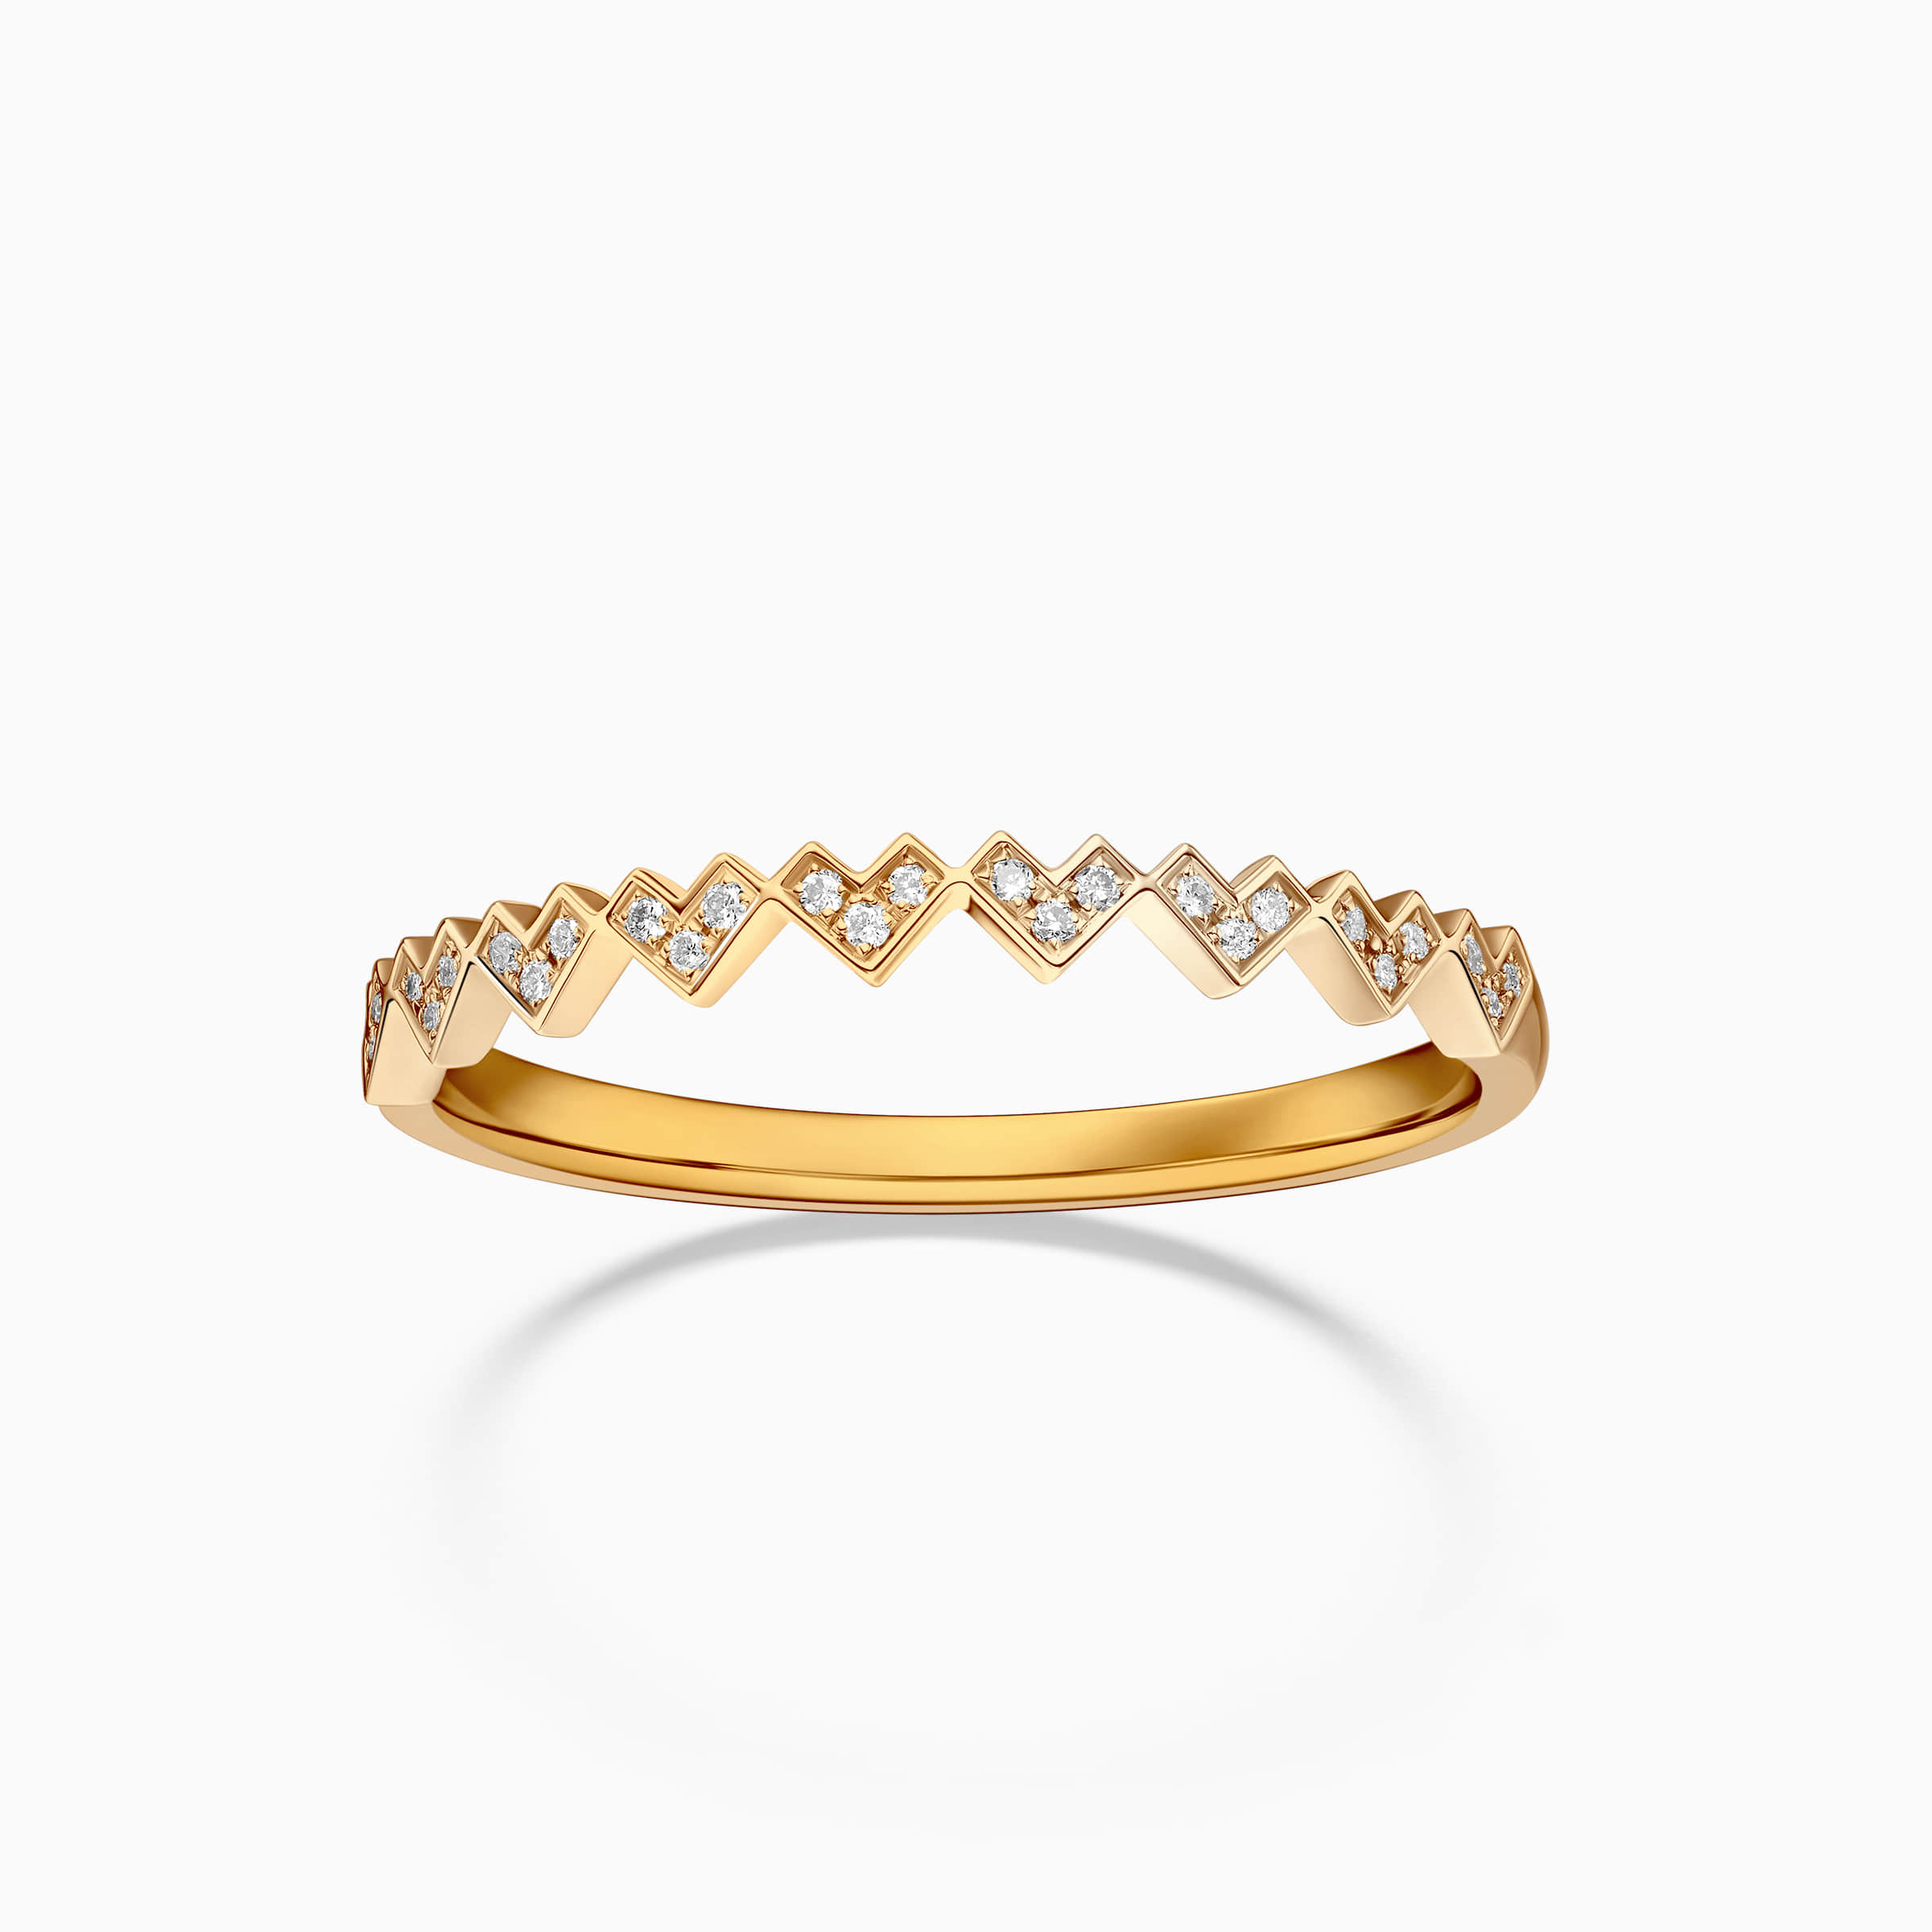 Darry Ring heart shaped diamond wedding ring in yellow gold